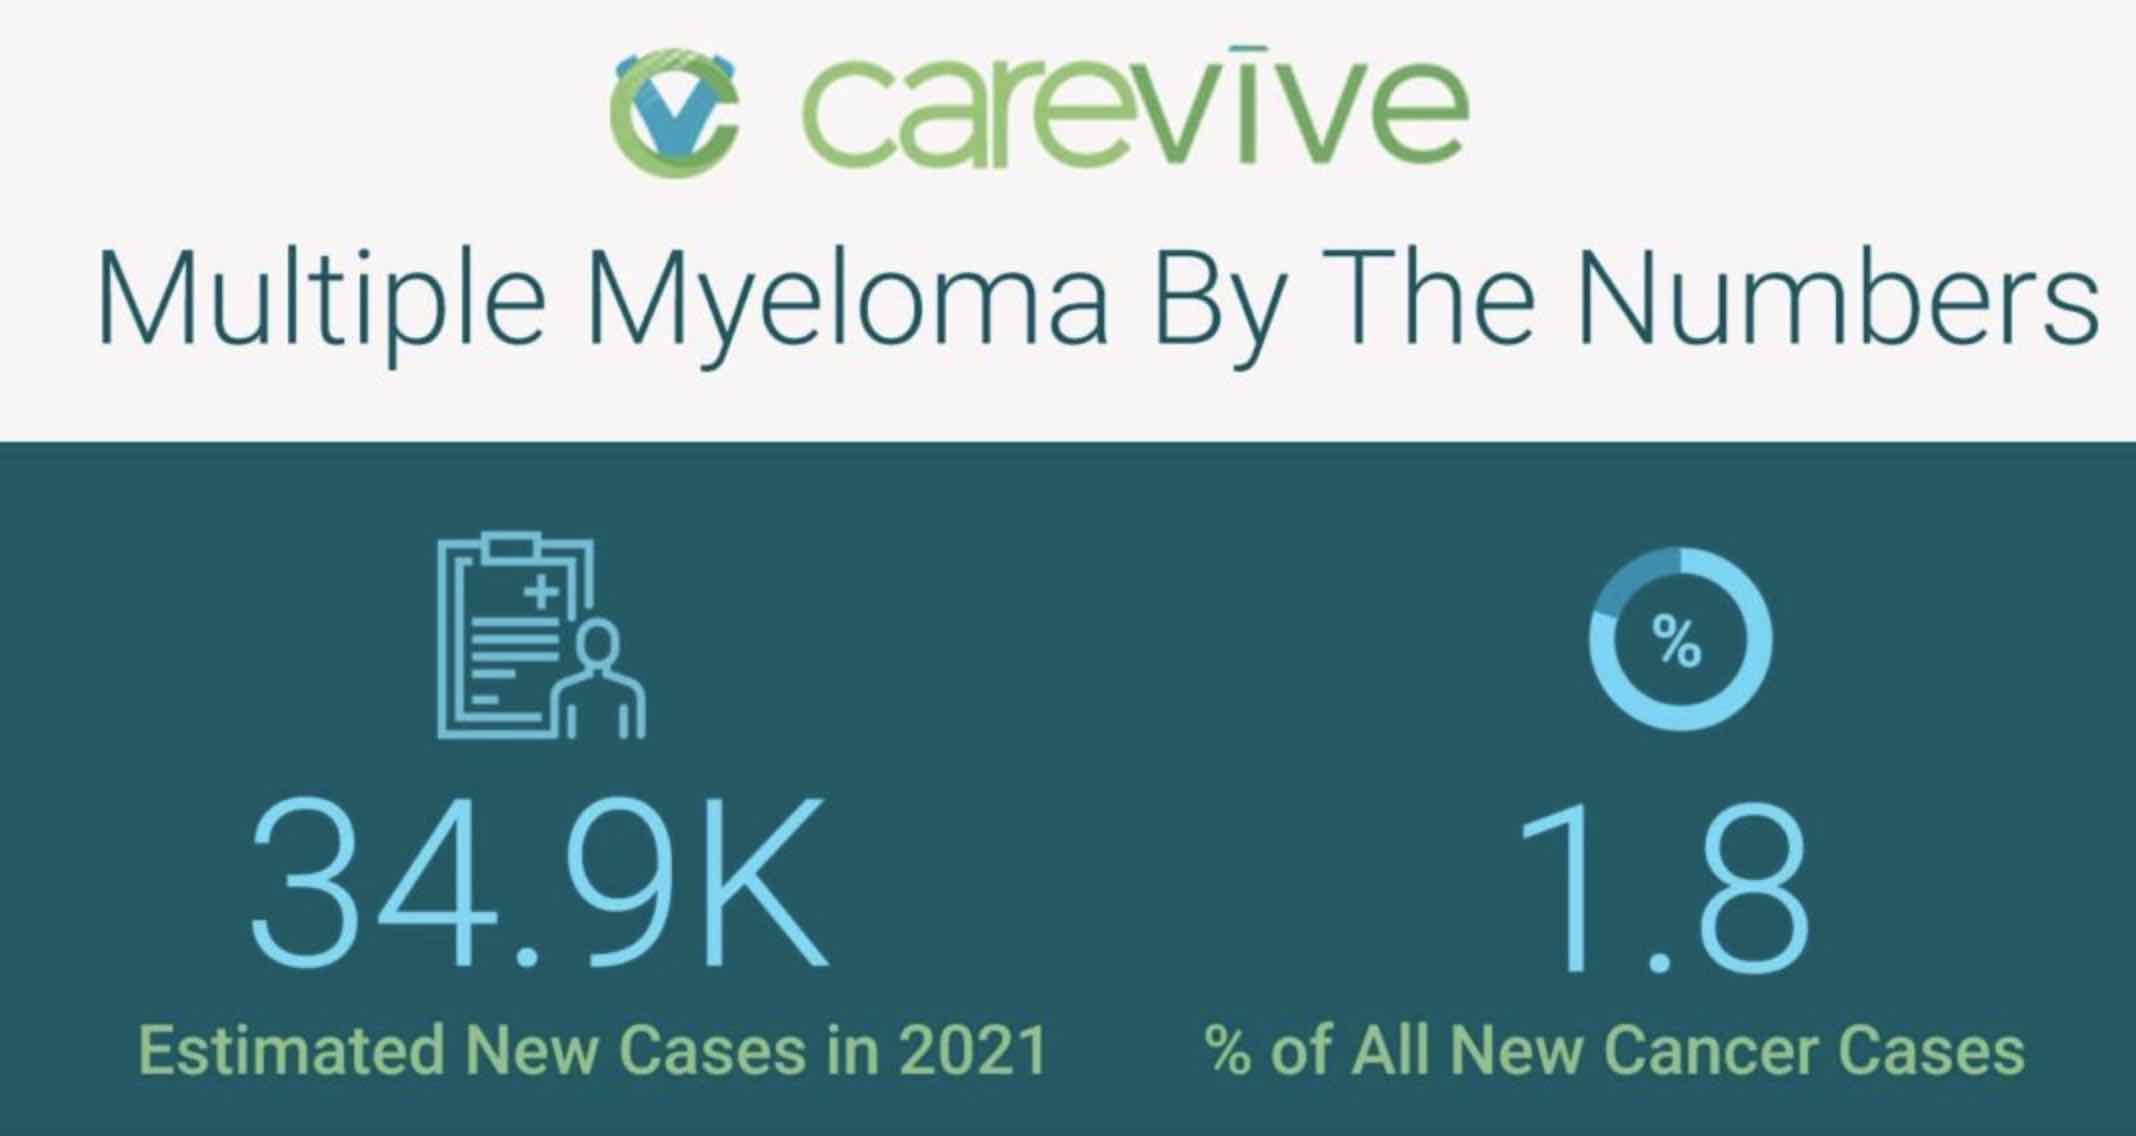 Mutiple Myeloma by the Numbers